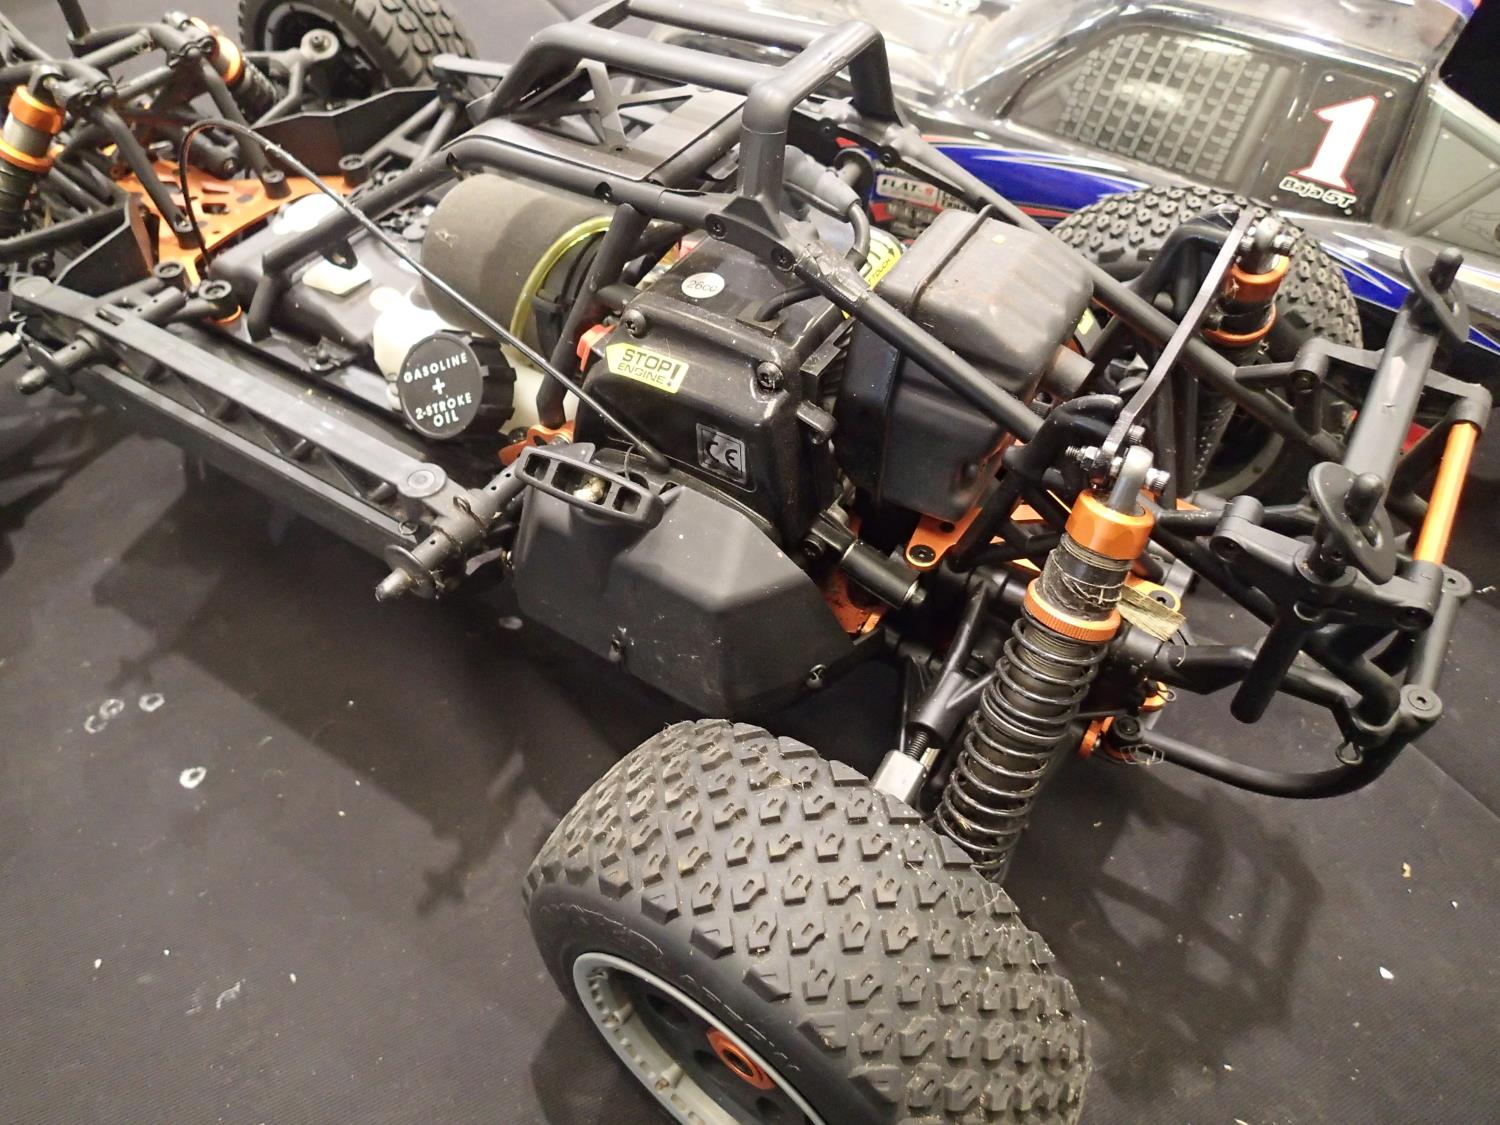 HPI Racing Baja 5T buggy, two stroke 26cc petrol engine with pull start, appears little used/ - Image 2 of 6